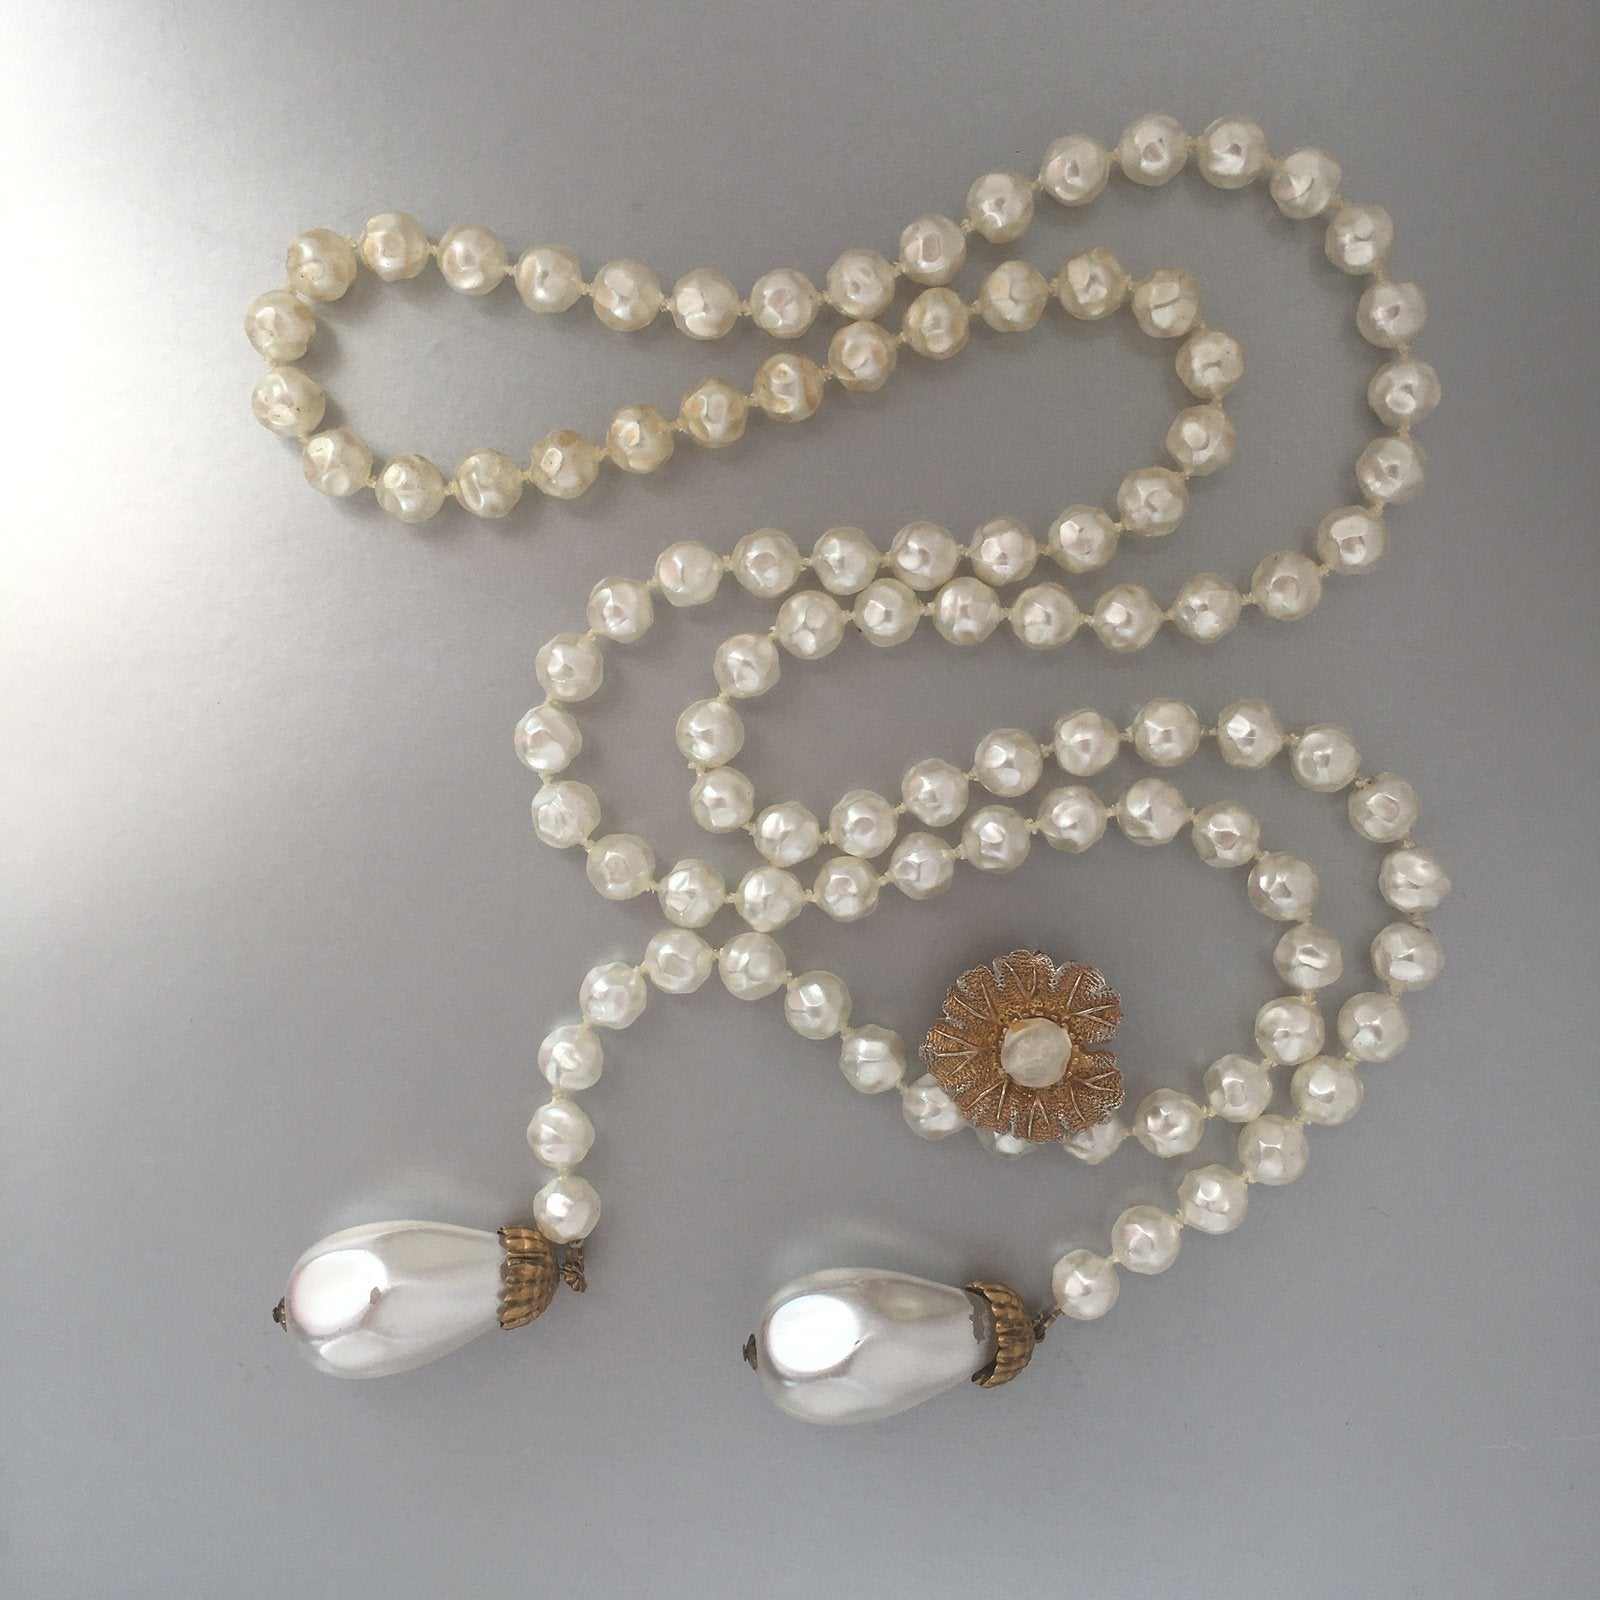 Floral Baroque Pearls Necklace Vintage Jewelry